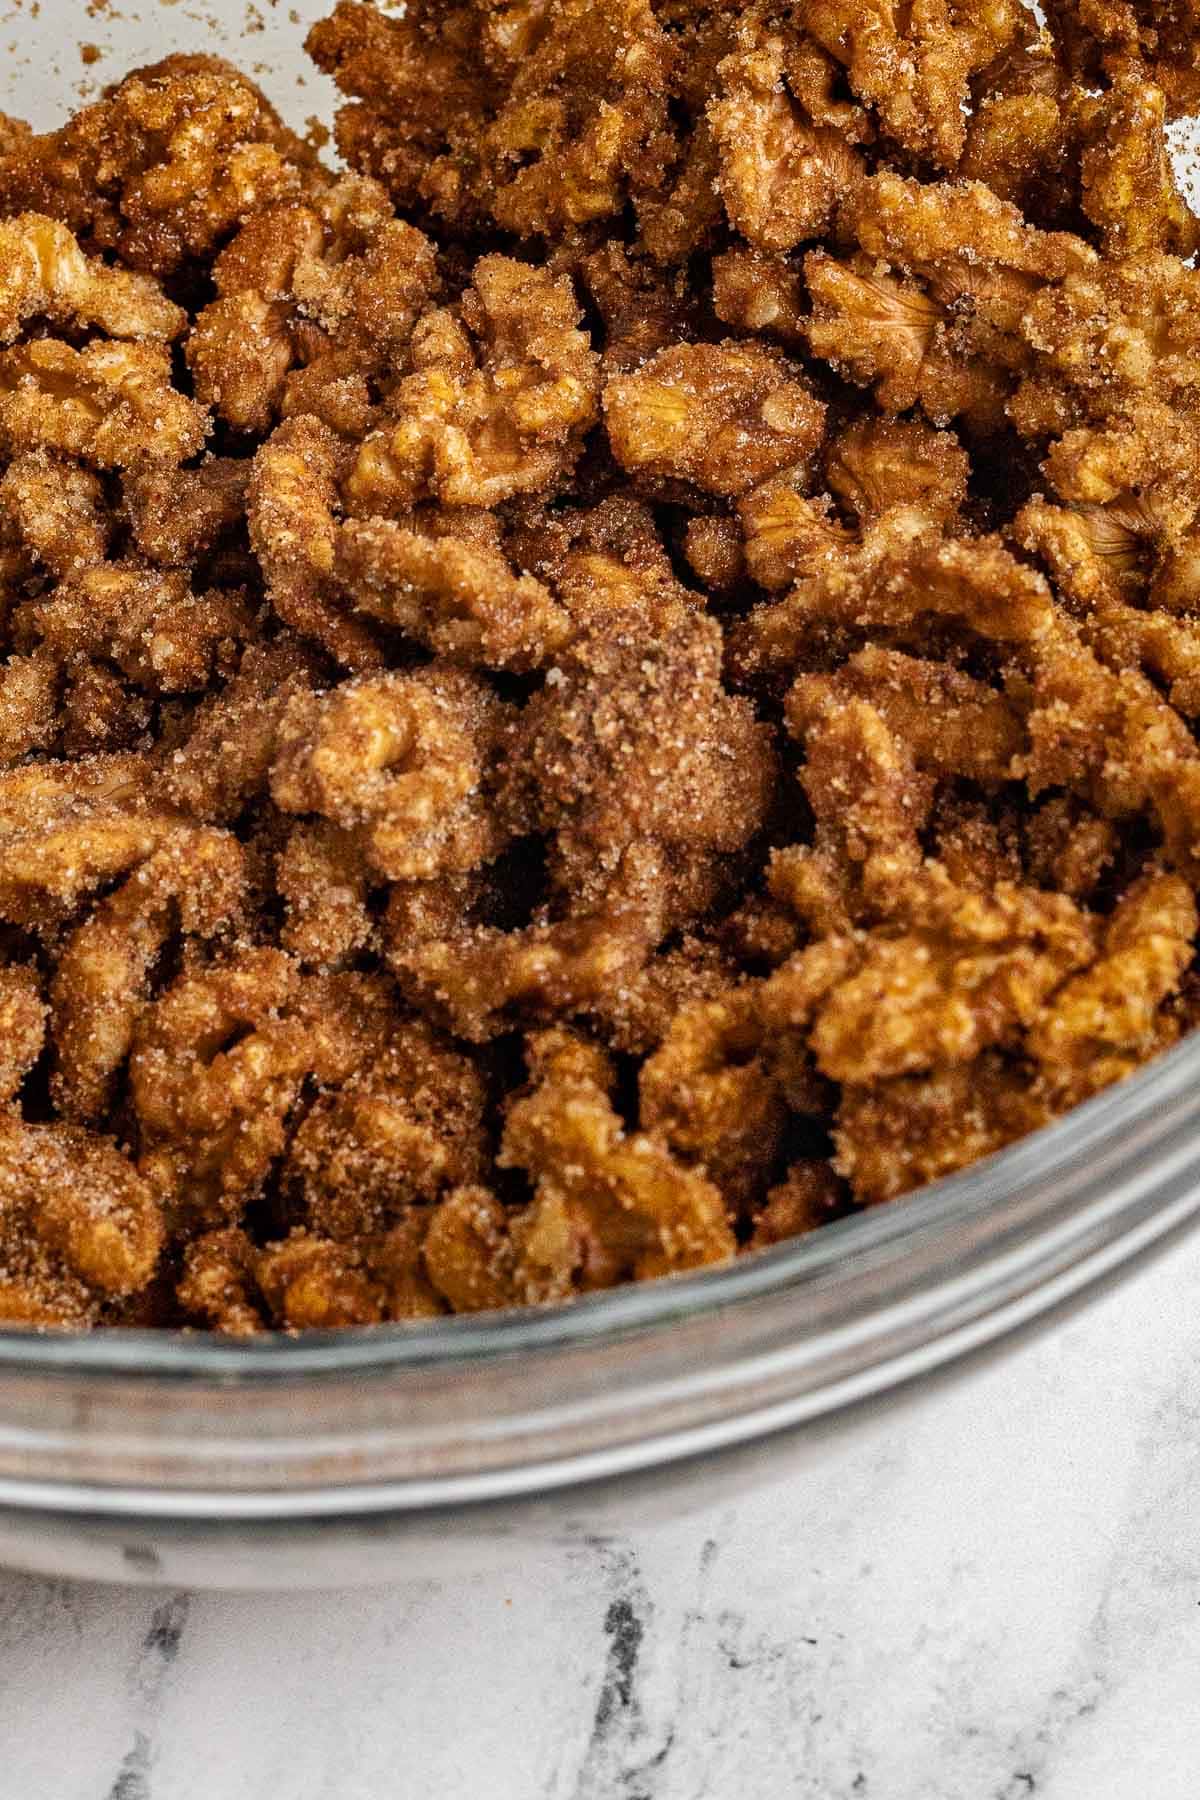 Candied Walnuts coated in sugar mixture in bowl